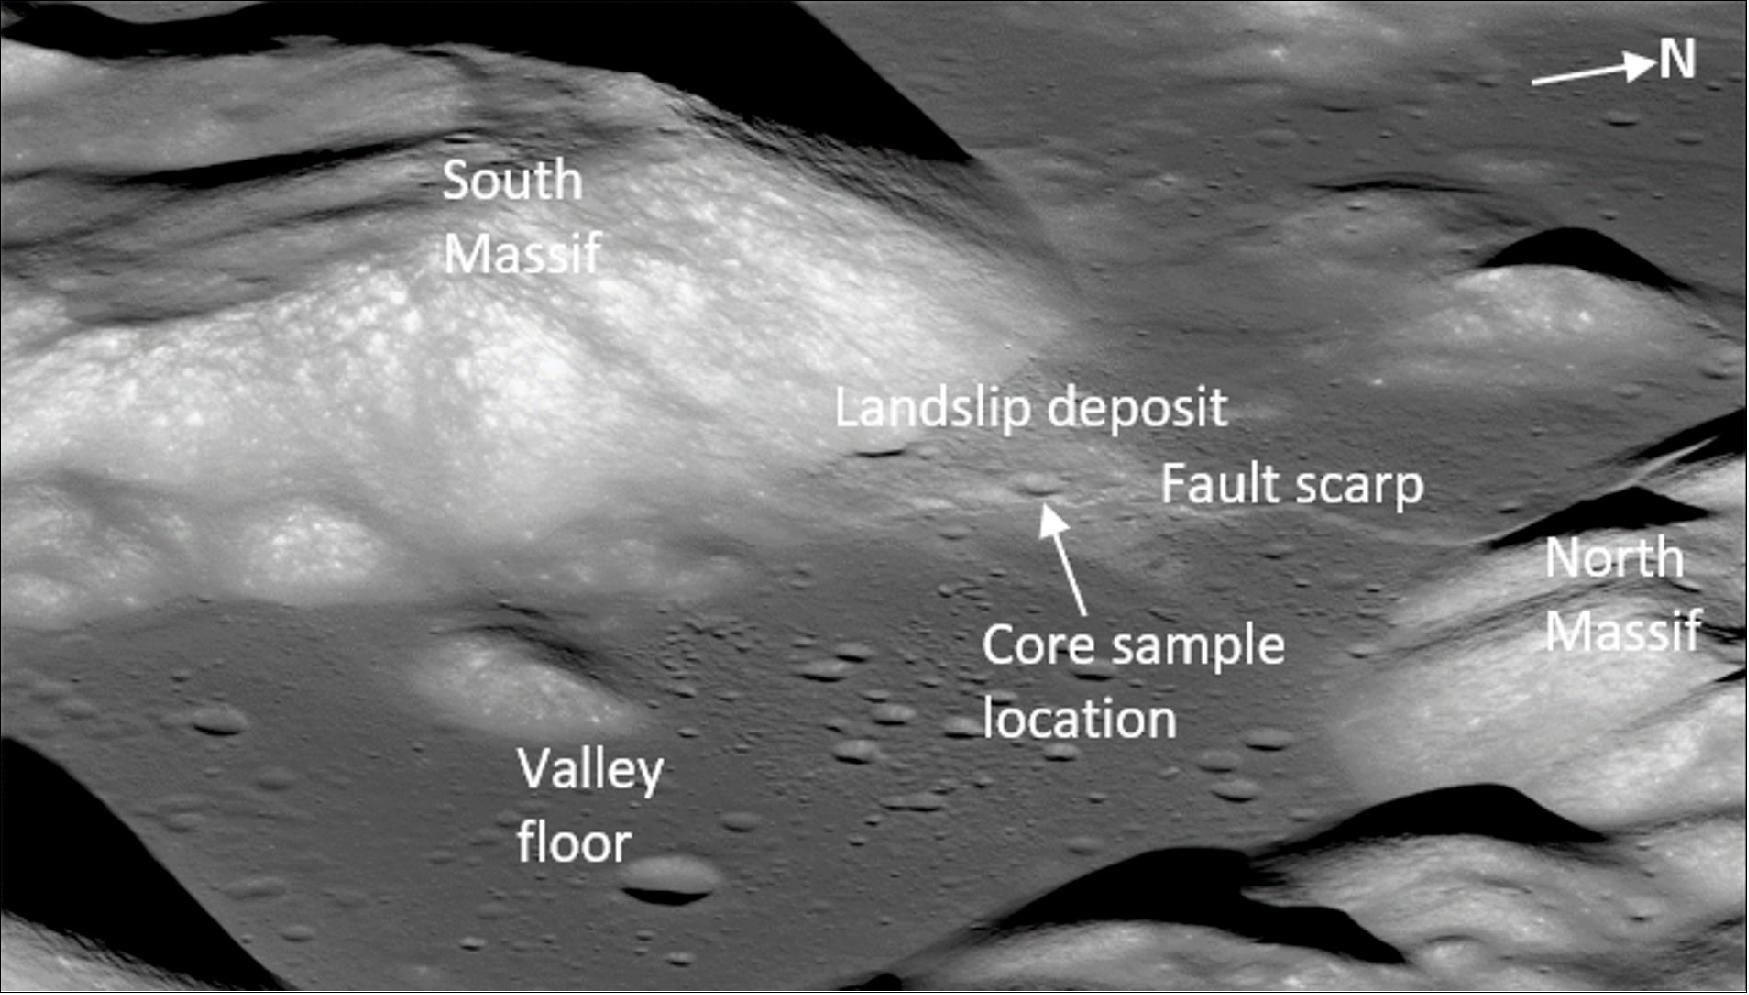 Figure 3: The Apollo 17 region. Oblique view of 18 km wide and 2.6 km deep Taurus-Littrow valley. Original image by NASA/GSFC/Arizona State University using the LRO (Lunar Reconnaissance Orbiter) image M192703697LR, annotated by Francesca McDonald (image credit: NASA/GSFC, Arizona State University)